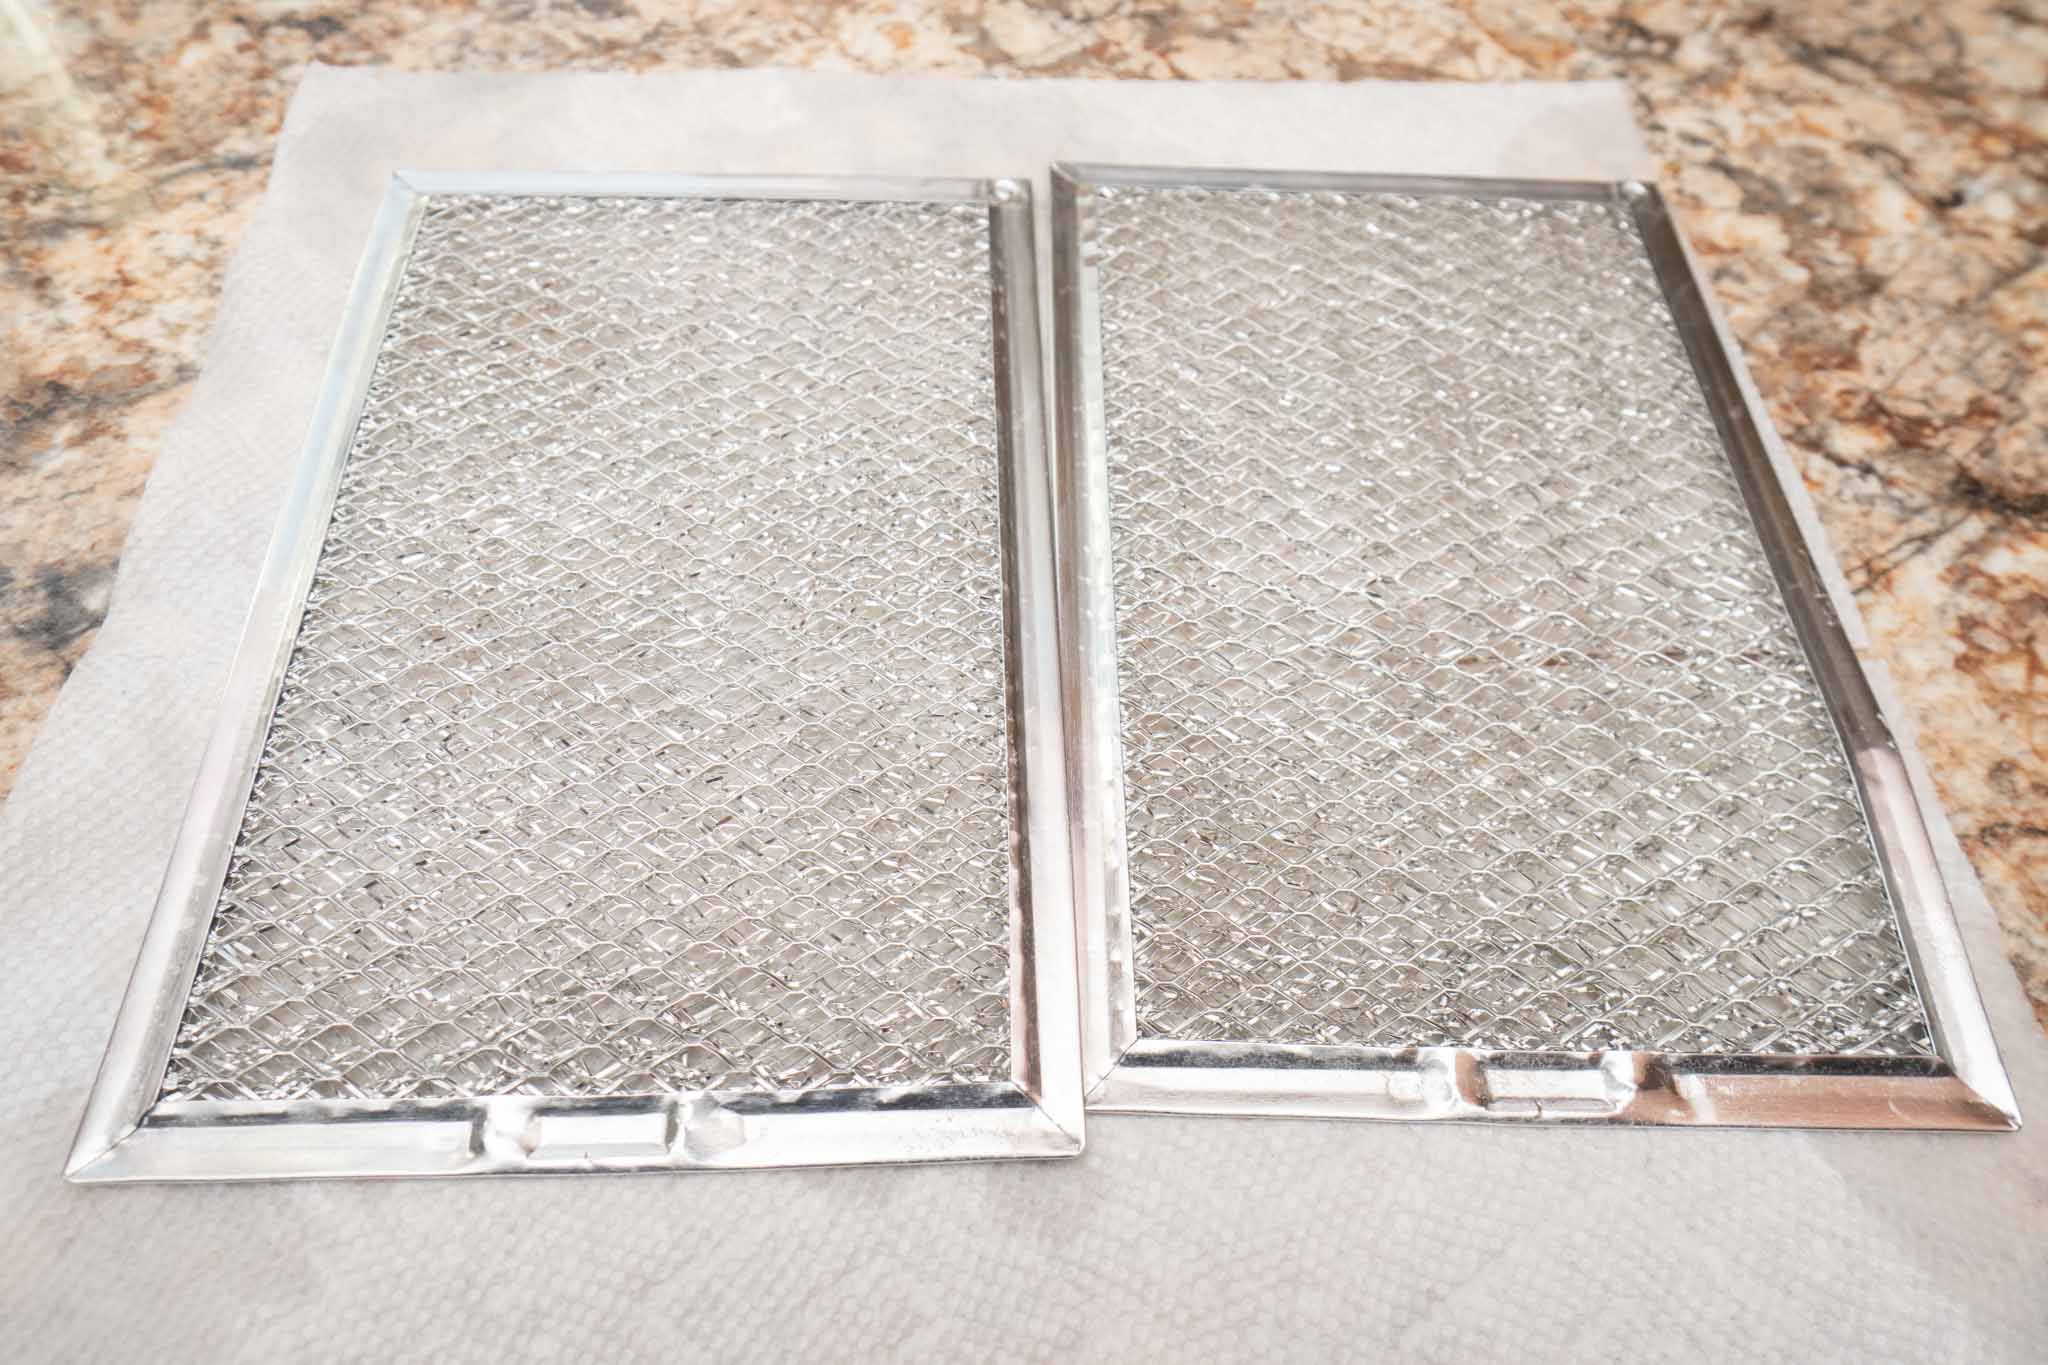 drying microwave mesh filters